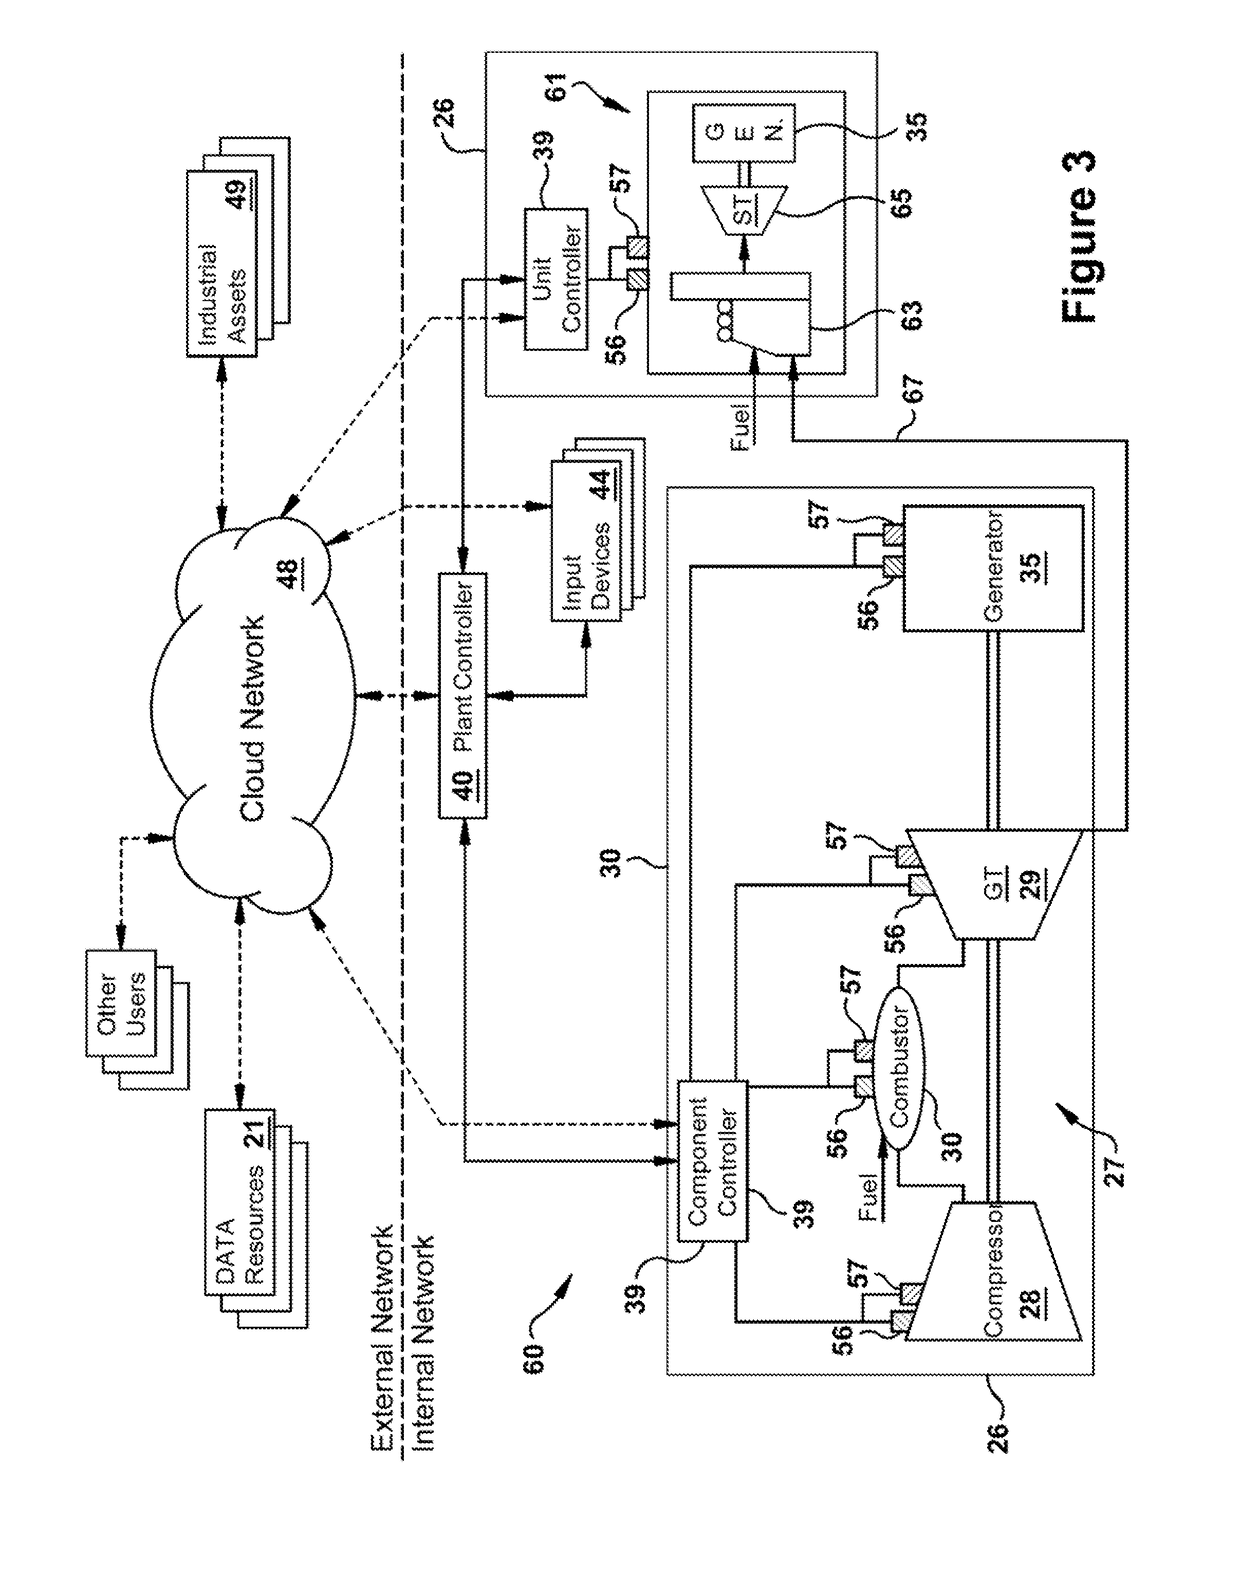 Methods and systems for controlling generating units and power plants for improved performance